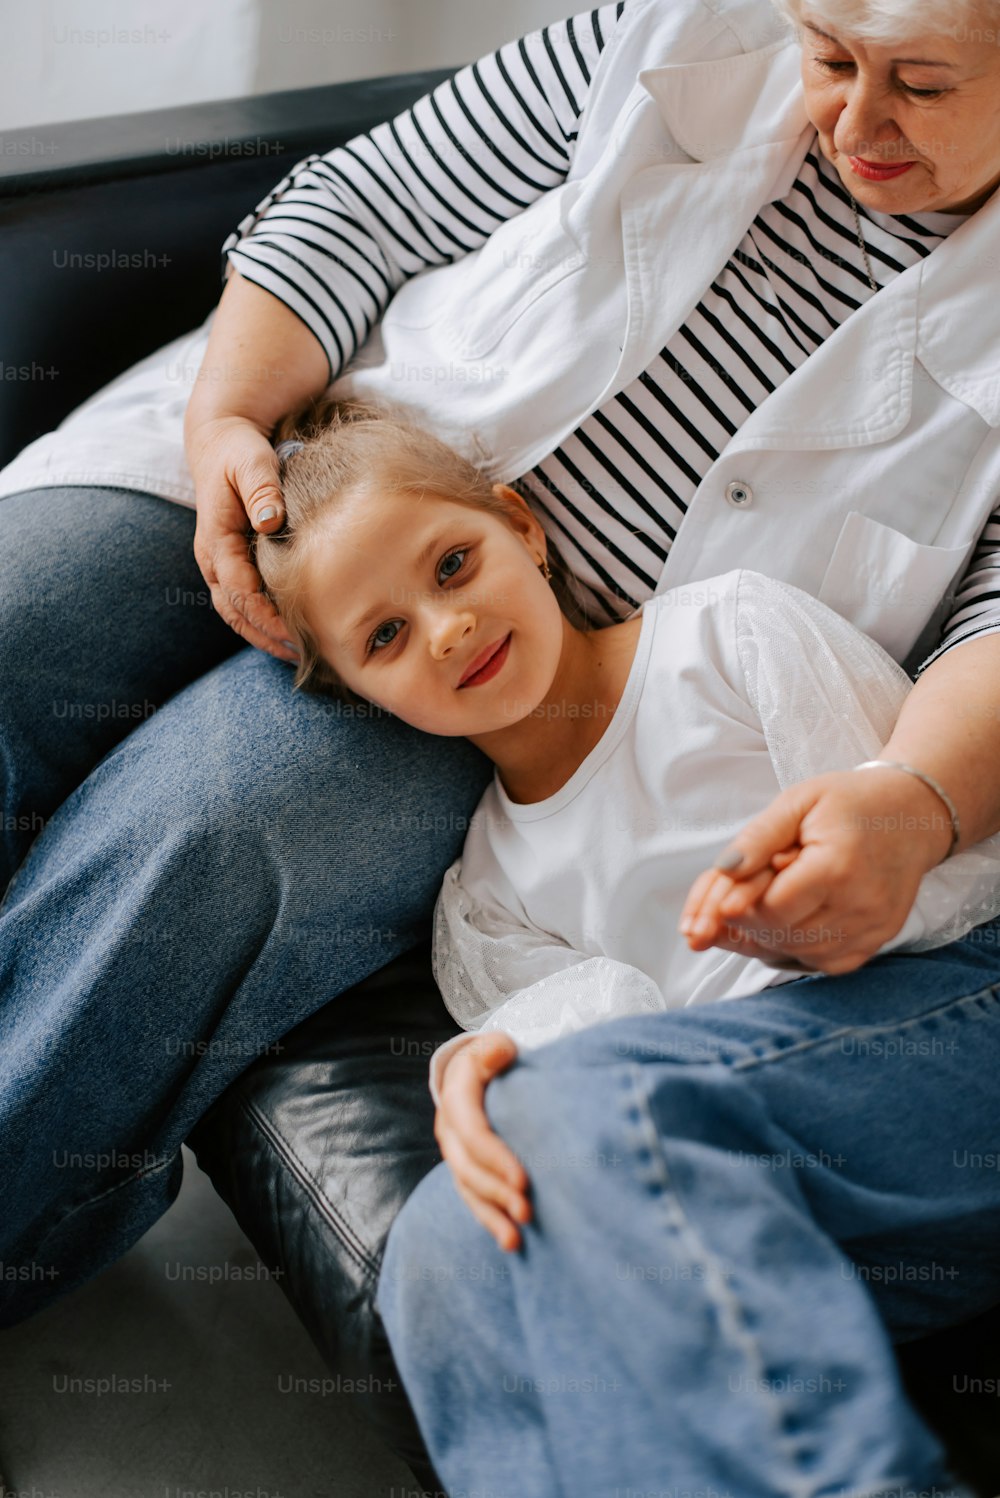 a woman sitting next to a child on a couch